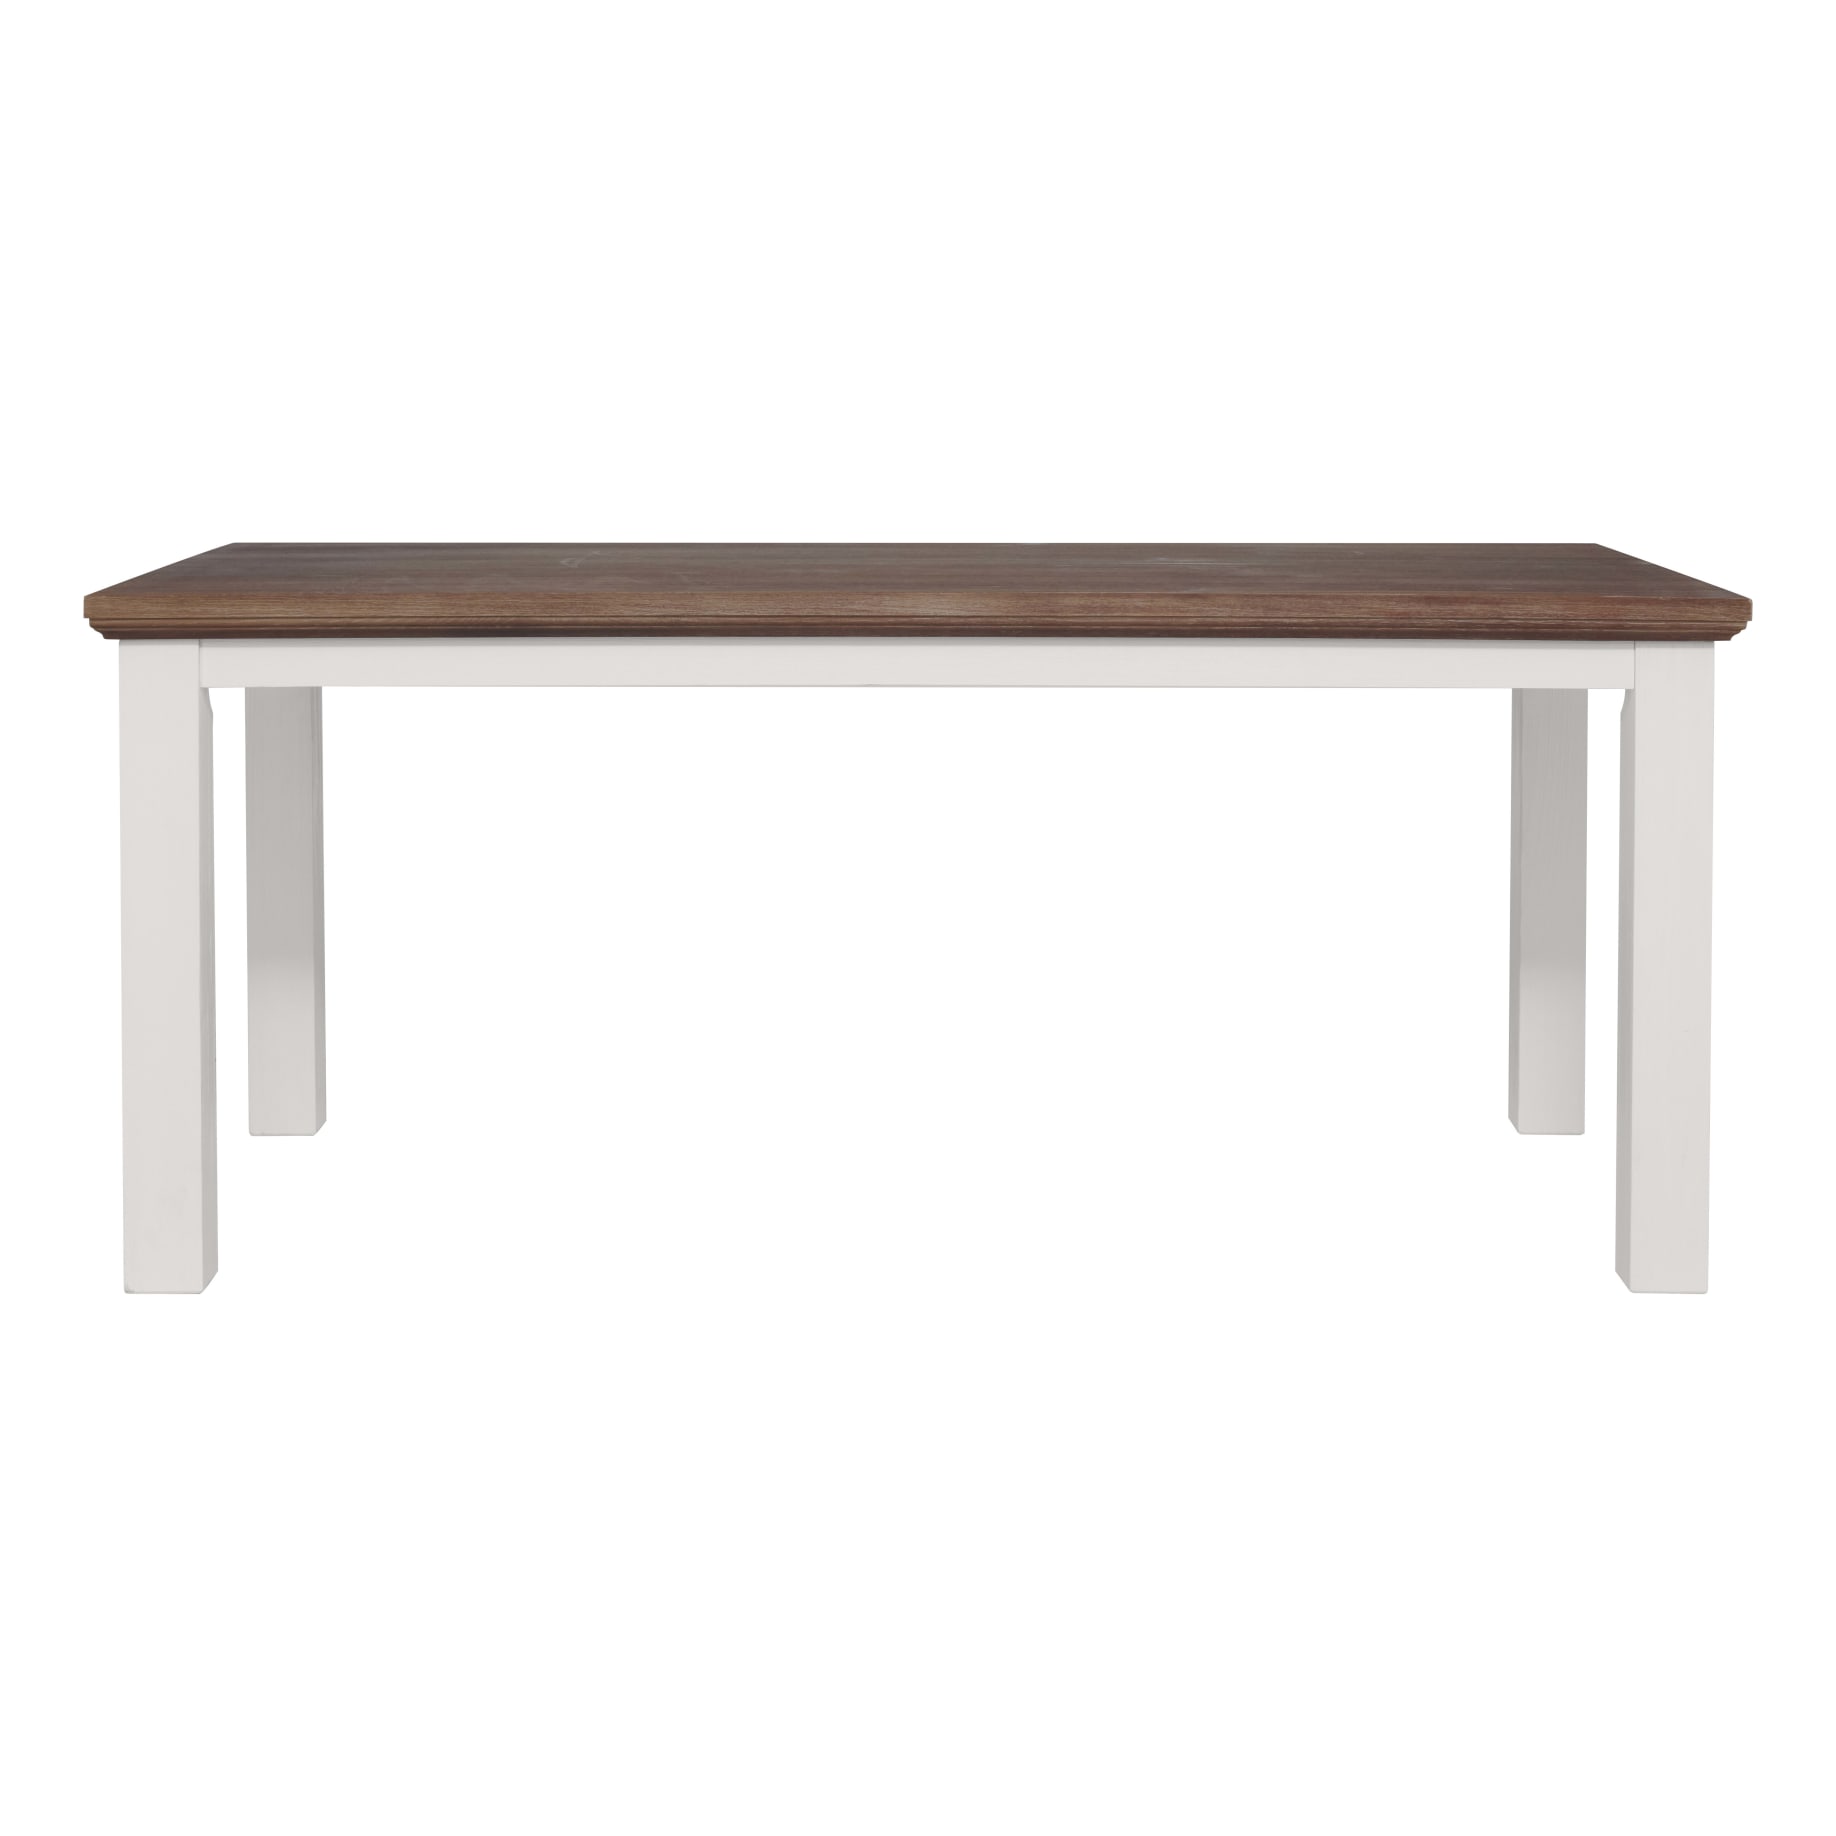 Hamptons Dining Table 220cm in Acacia Two Tone